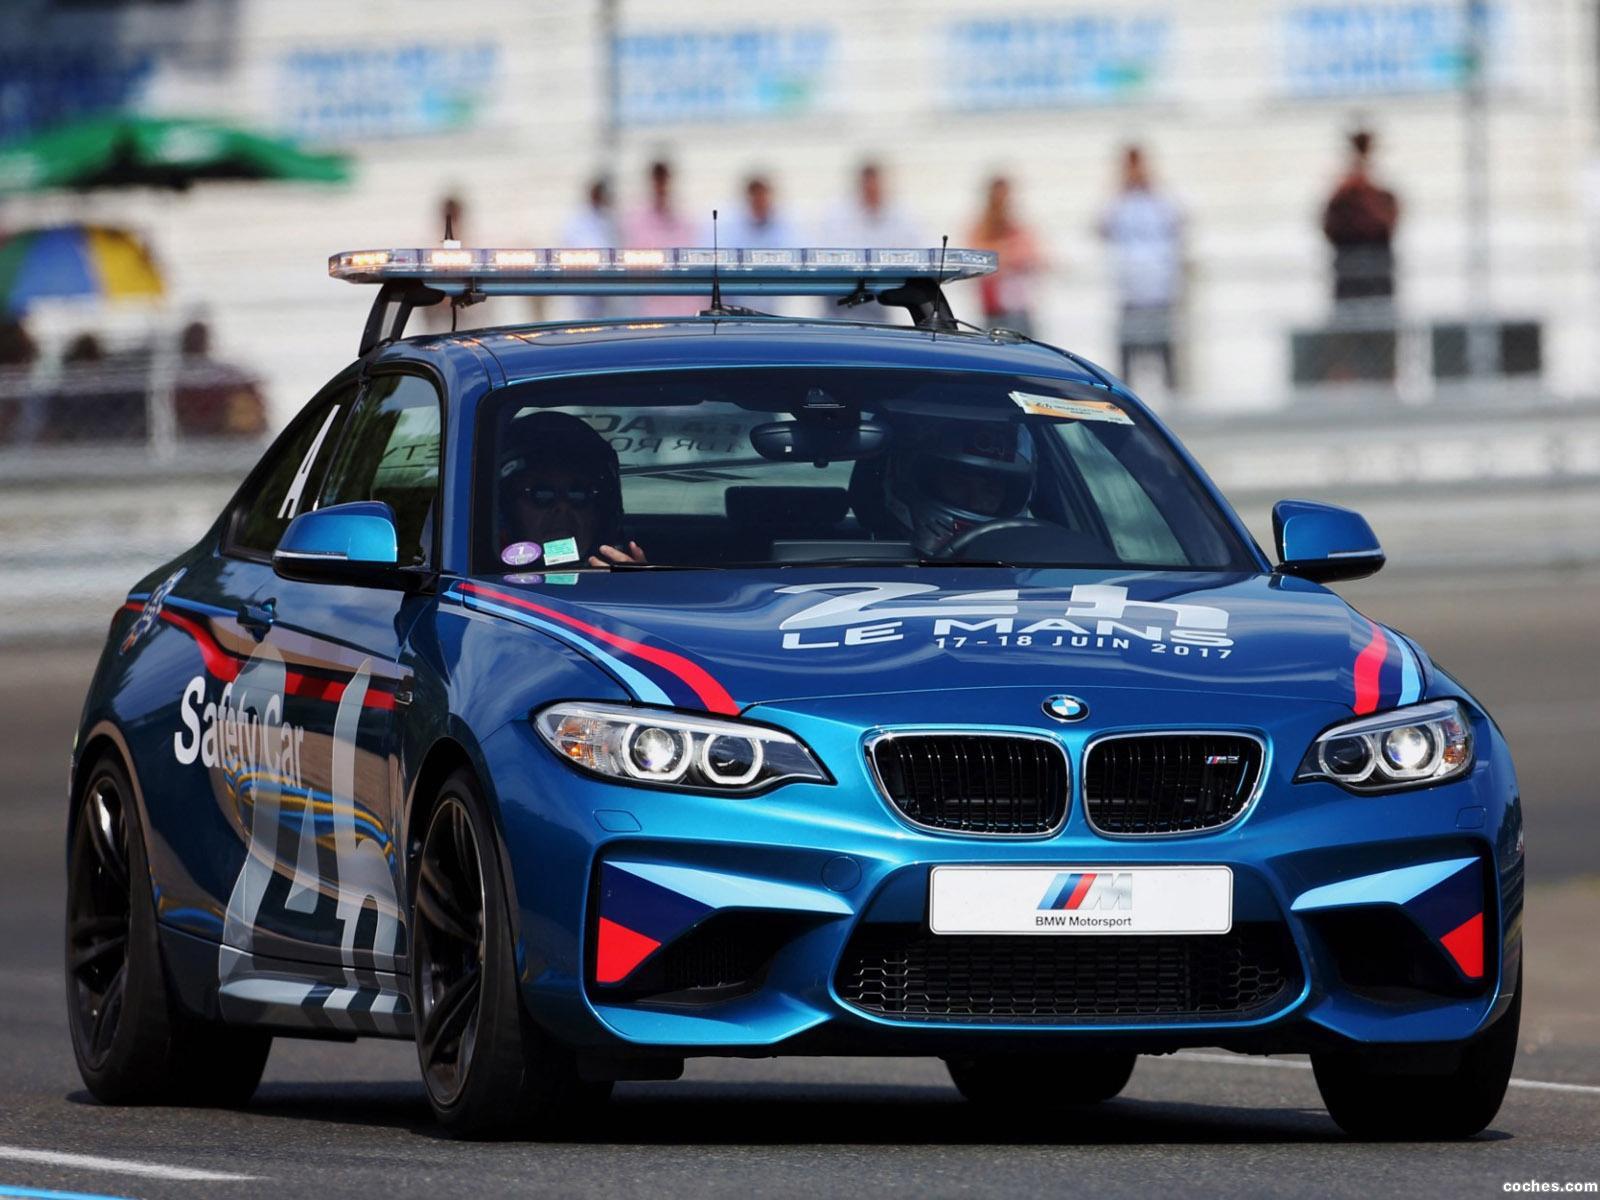 bmw_m2-coupe-24-hours-of-le-mans-safety-car-f87-2017_r3.jpg